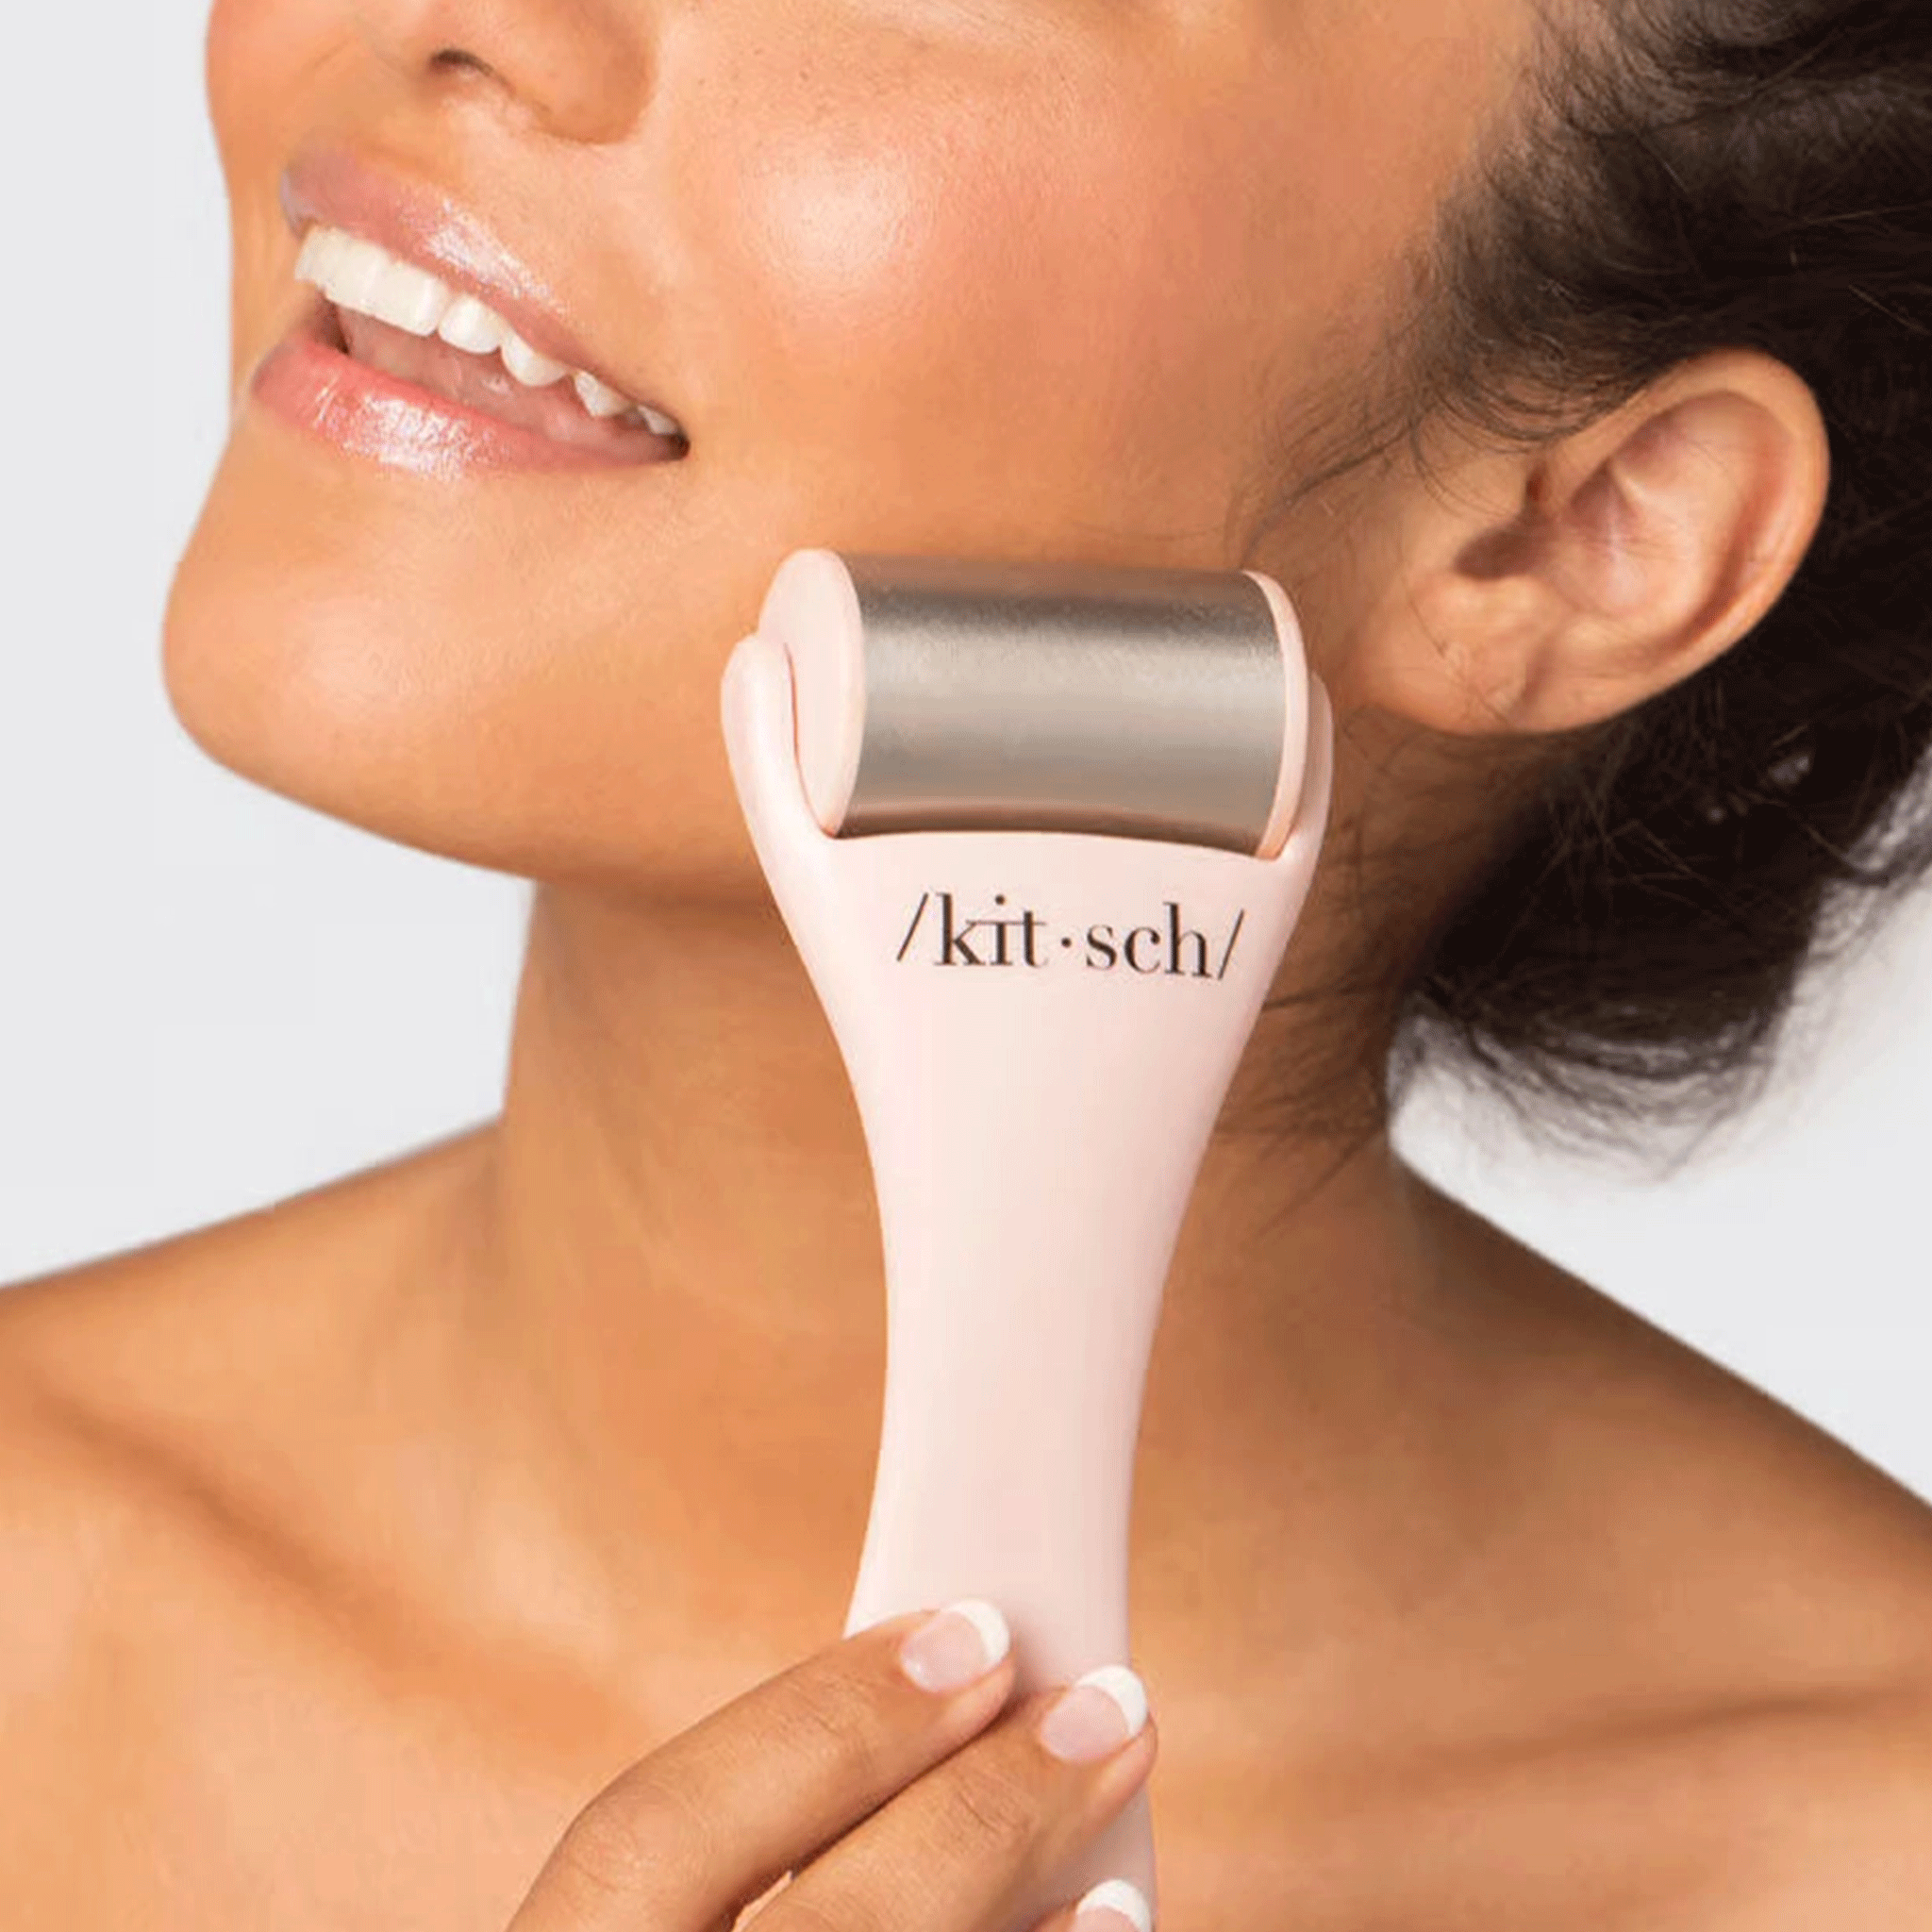 On a white background is a model holding a light pink and stainless steel facial ice roller.